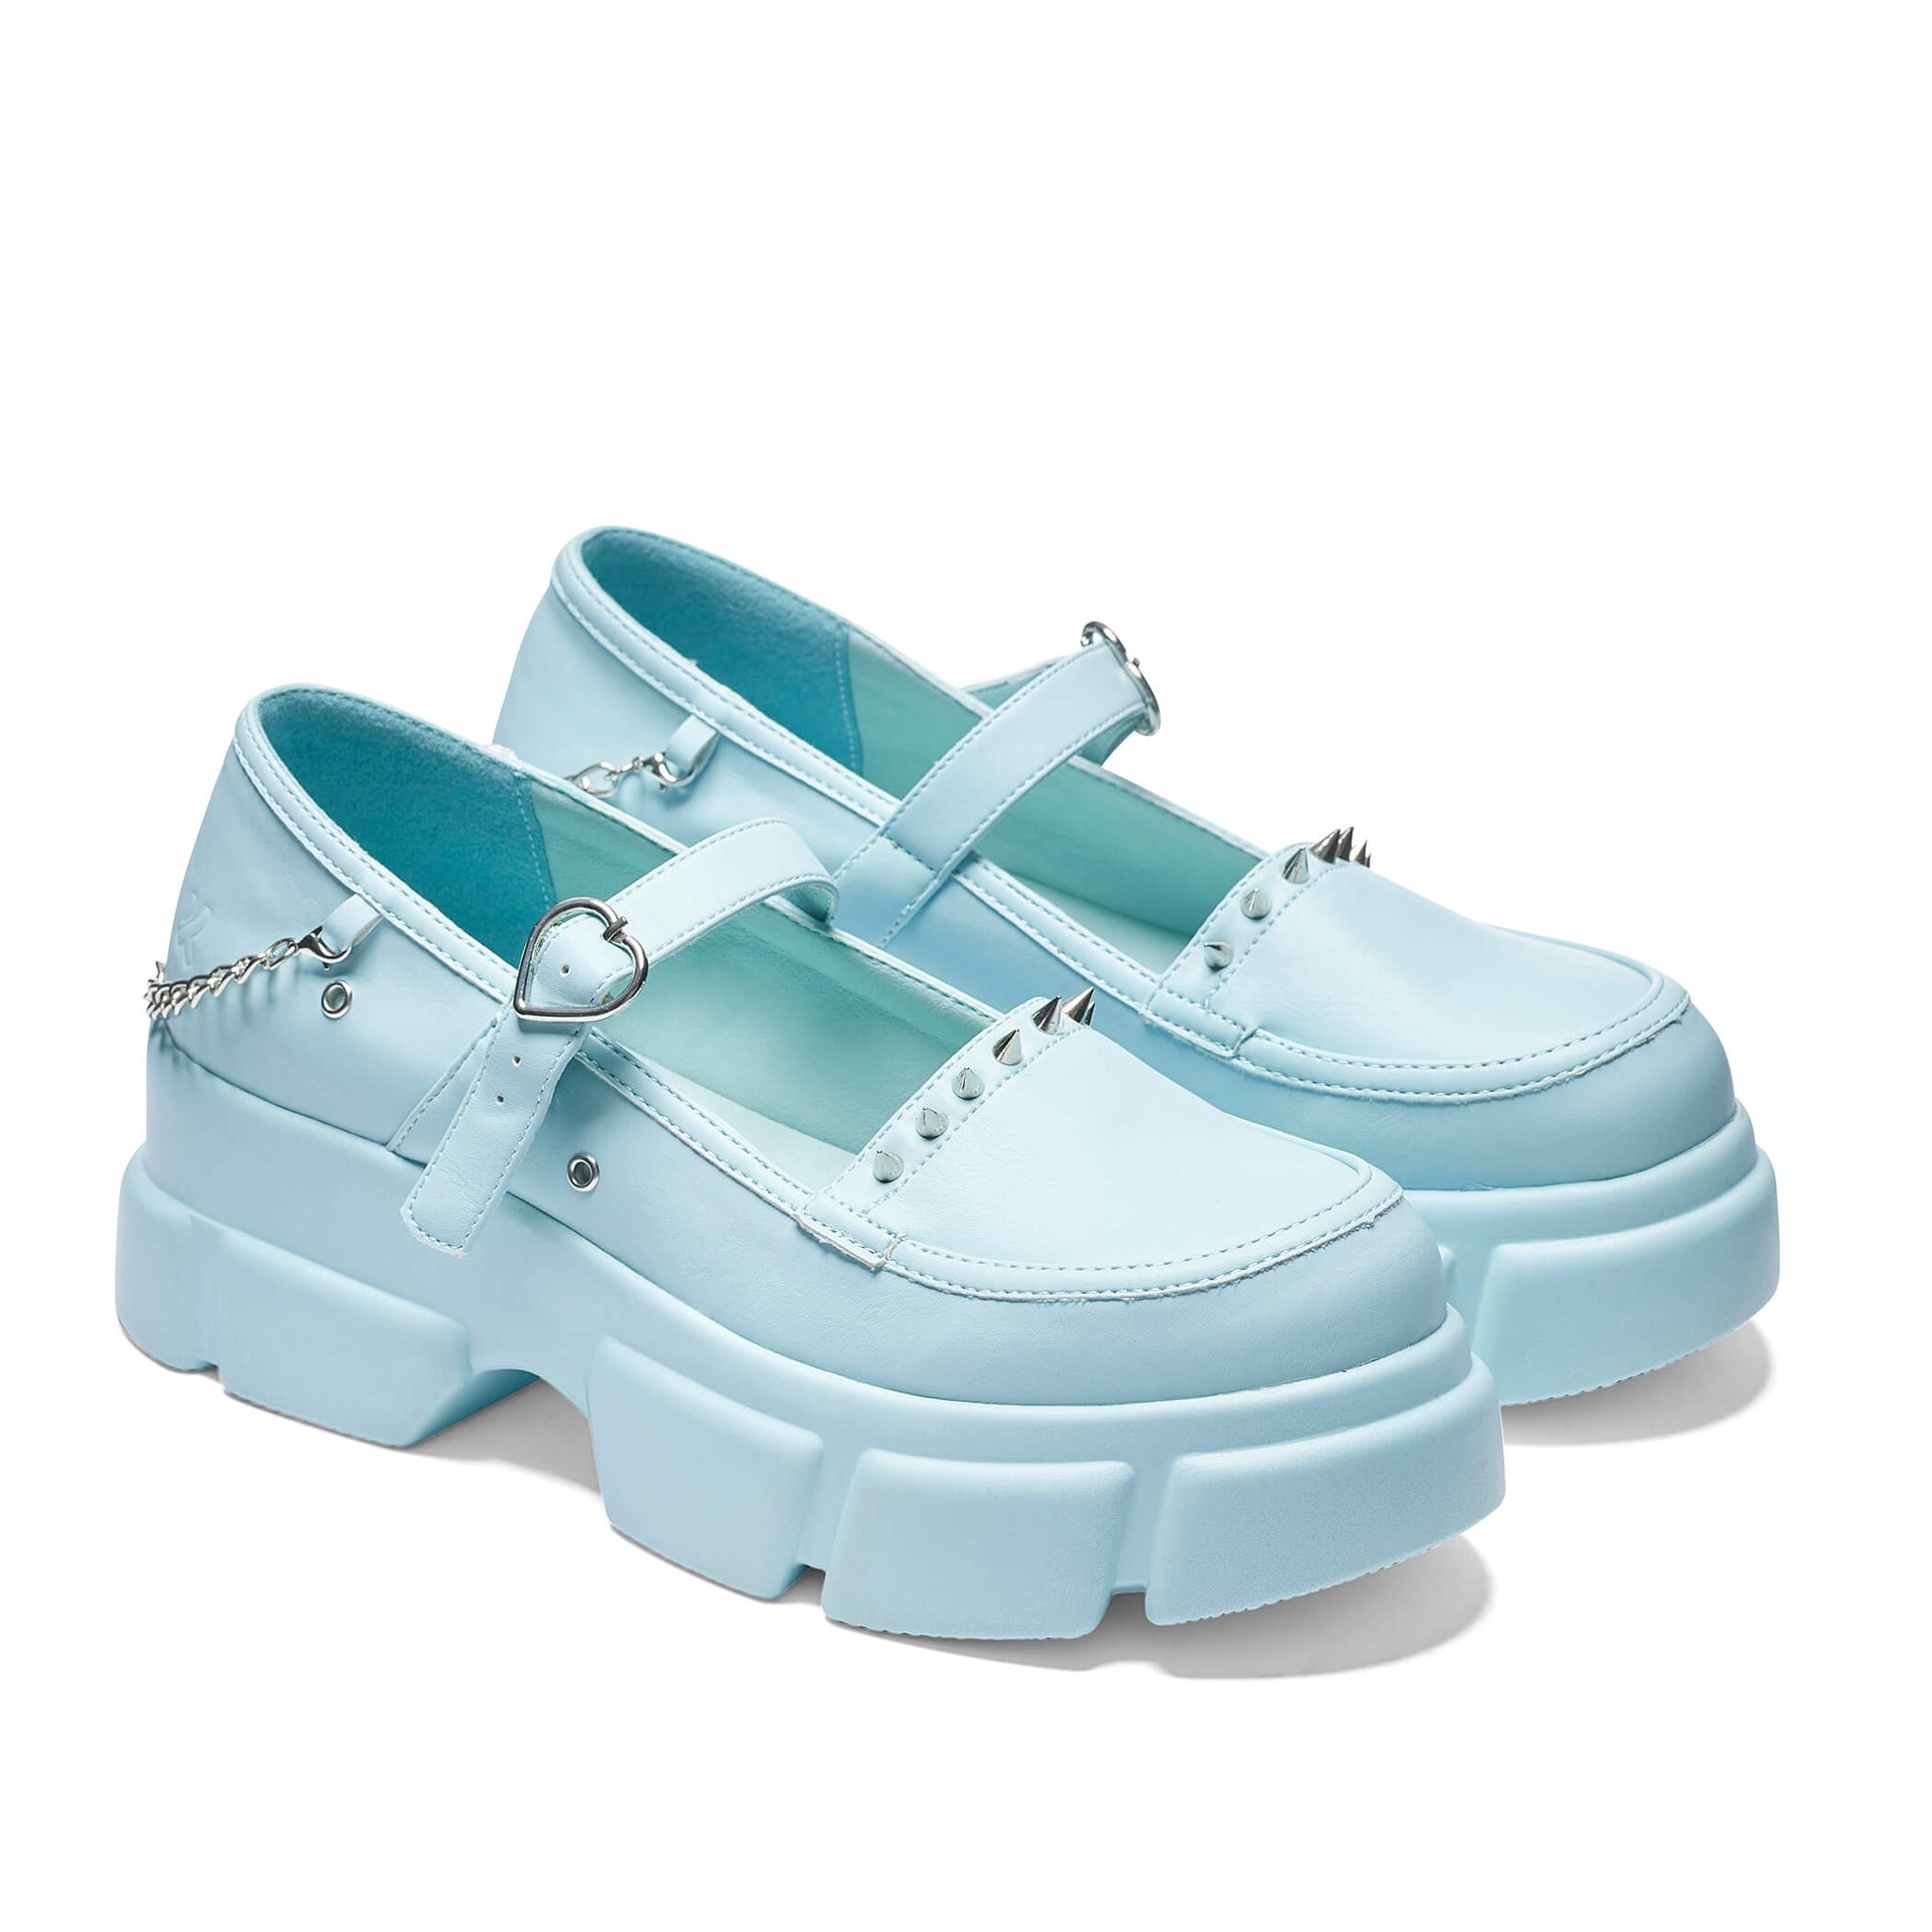 Cloud Mist Chunky Shoes - Baby Blue - Shoes - KOI Footwear - Blue - Three-Quarter View